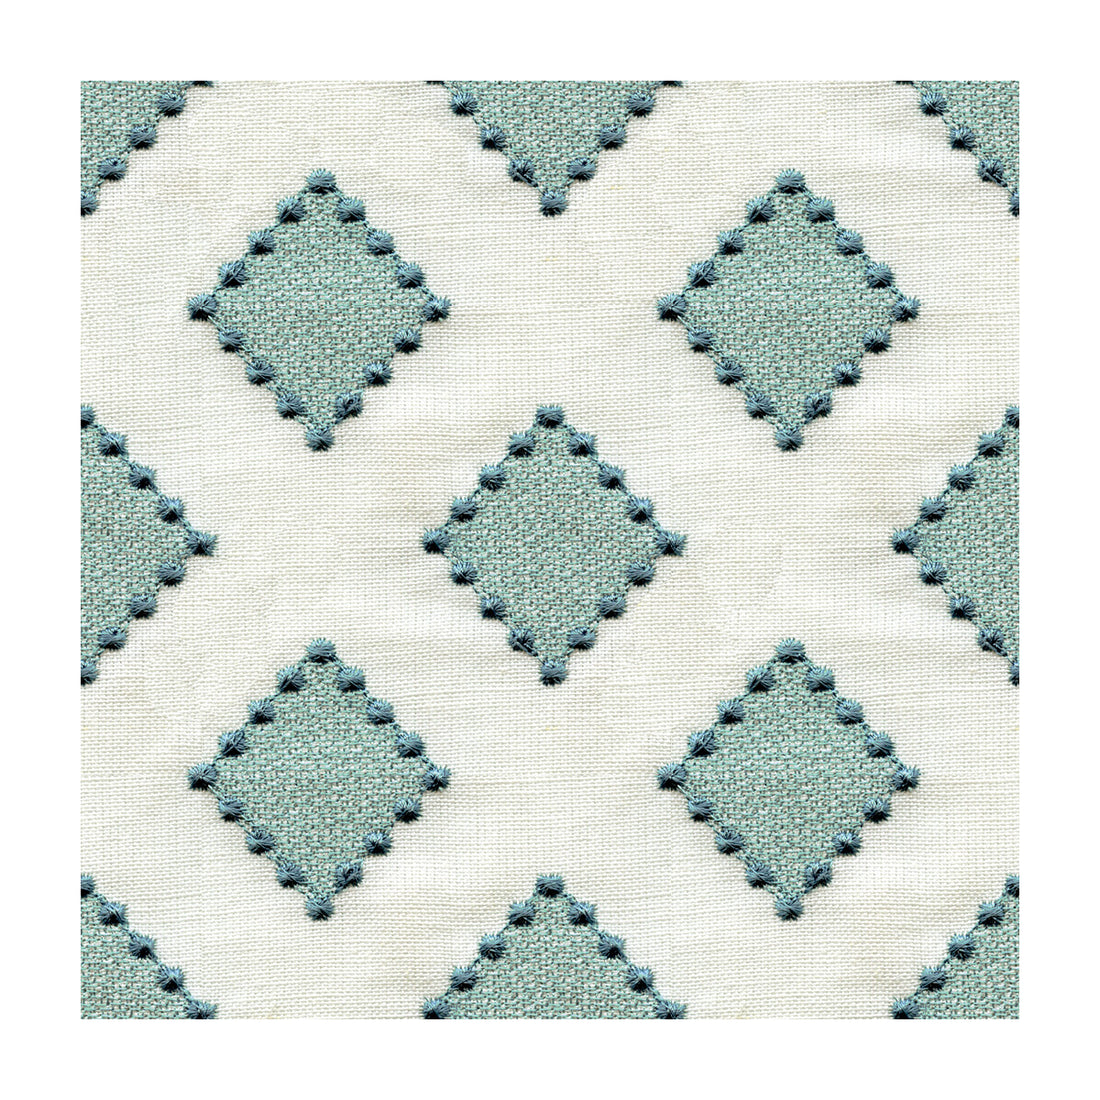 Diamondots fabric in turquoise color - pattern 34267.1516.0 - by Kravet Basics in the Sarah Richardson Harmony collection